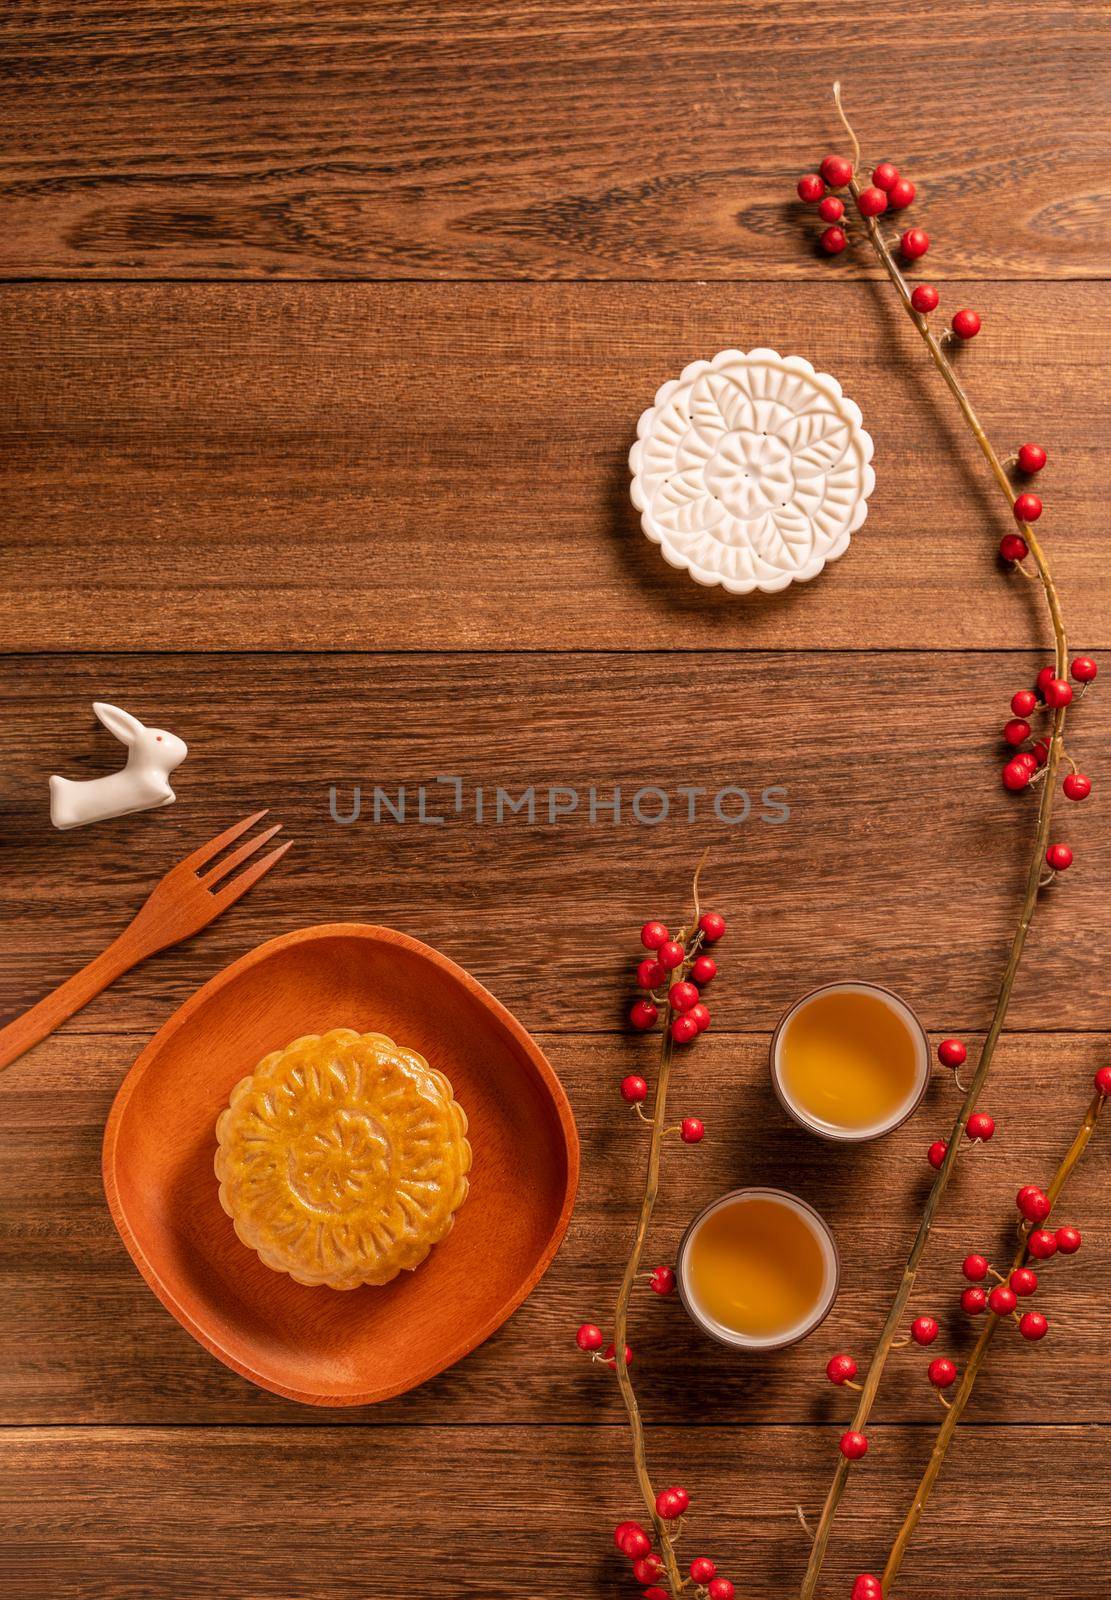 Creative Moon cake Mooncake table design - Chinese traditional pastry with tea cups on wooden background, Mid-Autumn Festival concept, top view, flat lay. by ROMIXIMAGE